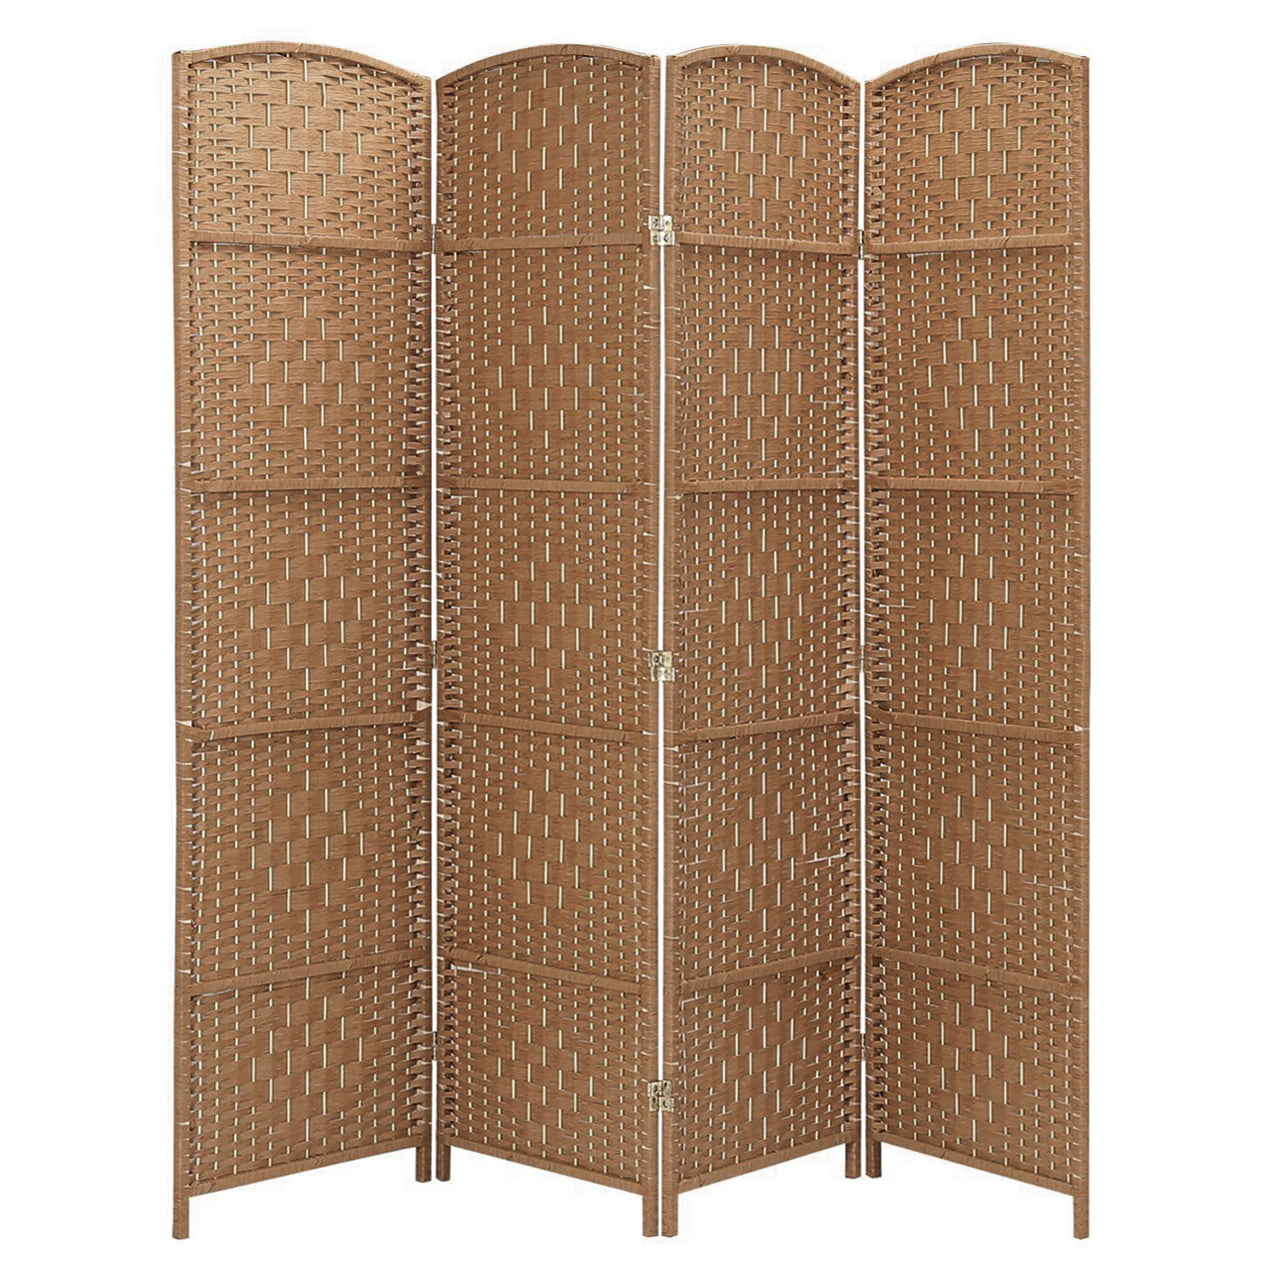 Rose Home Fashion RHF 6 ft.Tall-15.7 Wide Diamond Weave Fiber 4 Panels Room Divider/4 Panels Screen Folding Privacy Partition Wall Room Divider Freestanding 4 Panel Dark Coffee